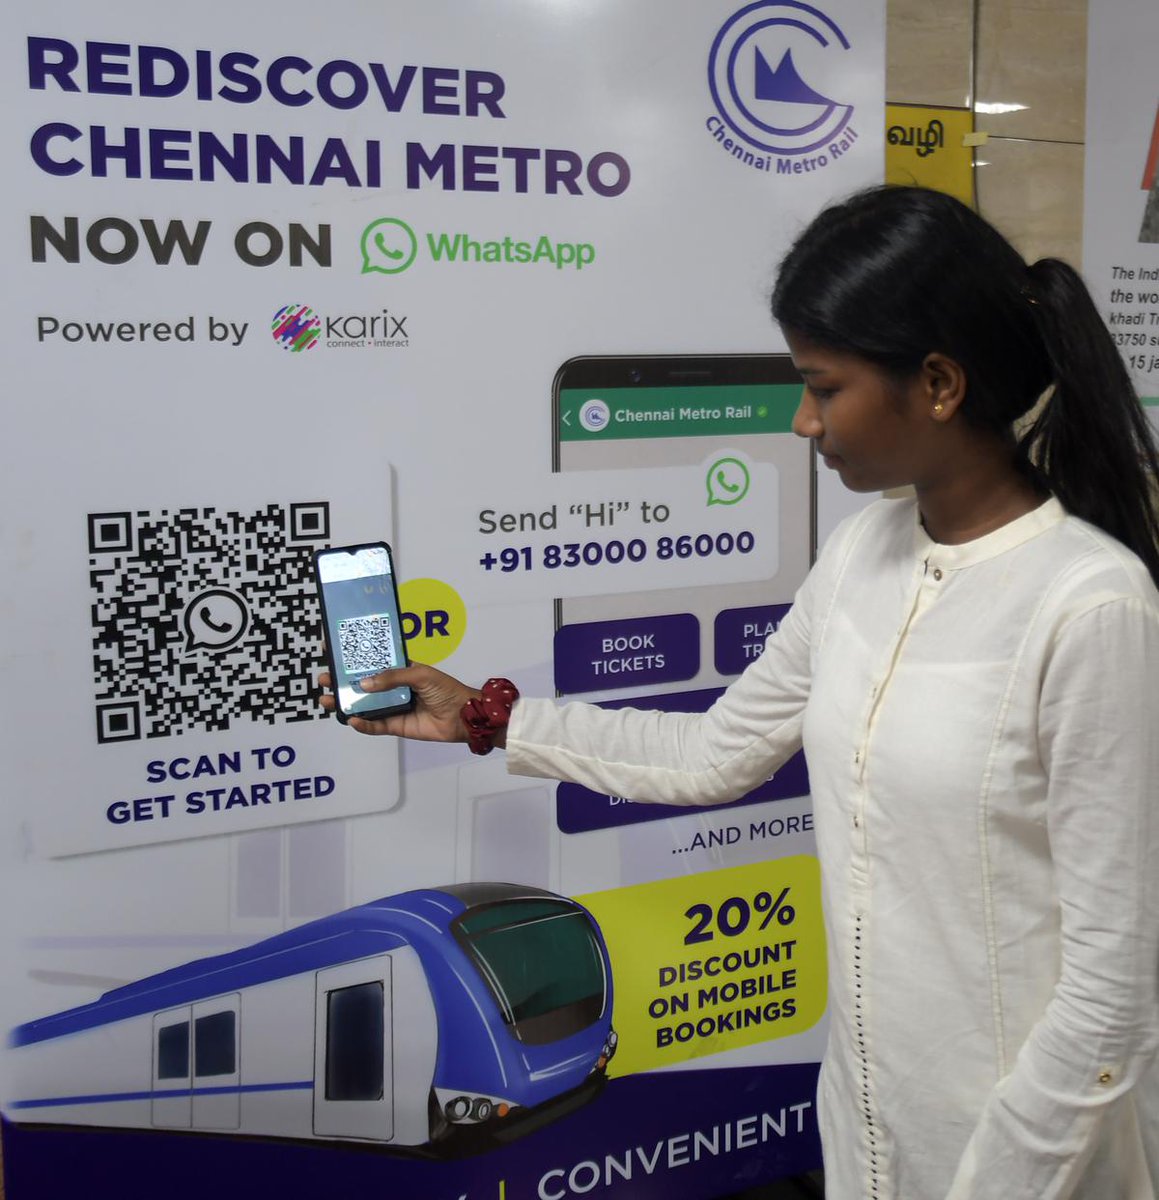 Travel made effortless for over 3 Lakh commuters using the Chennai metro daily. In just a few hours of the launch of the WhatsApp chatbot-based QR ticketing service for CMRL, we witnessed over 50k user engagements!

Providing a wide array of digital services, this solution…